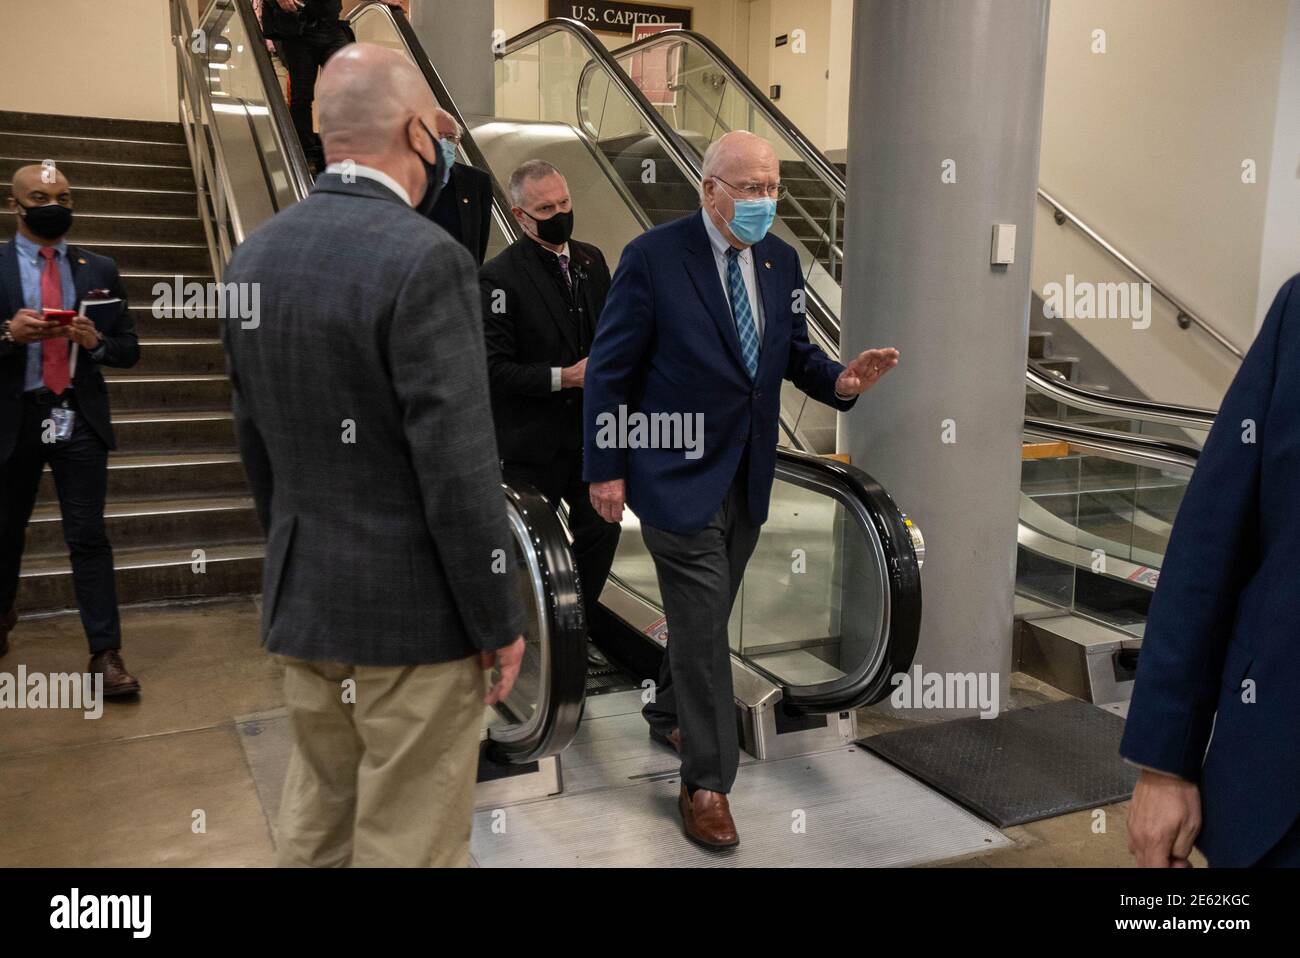 Washington, United States. 28th Jan, 2021. U.S. Sen. Patrick Leahy D-VT, after a procedural vote on the confirmation of Alejandro Mayorkas to be the next Department of Homeland Security secretary on the Senate floor at the U.S. Capitol in Washington, DC on Thursday, January 28, 2021. The vote of 55-42, advanced the confirmation vote scheduled for Monday. Photo by Ken Cedeno/UPI. Credit: UPI/Alamy Live News Stock Photo